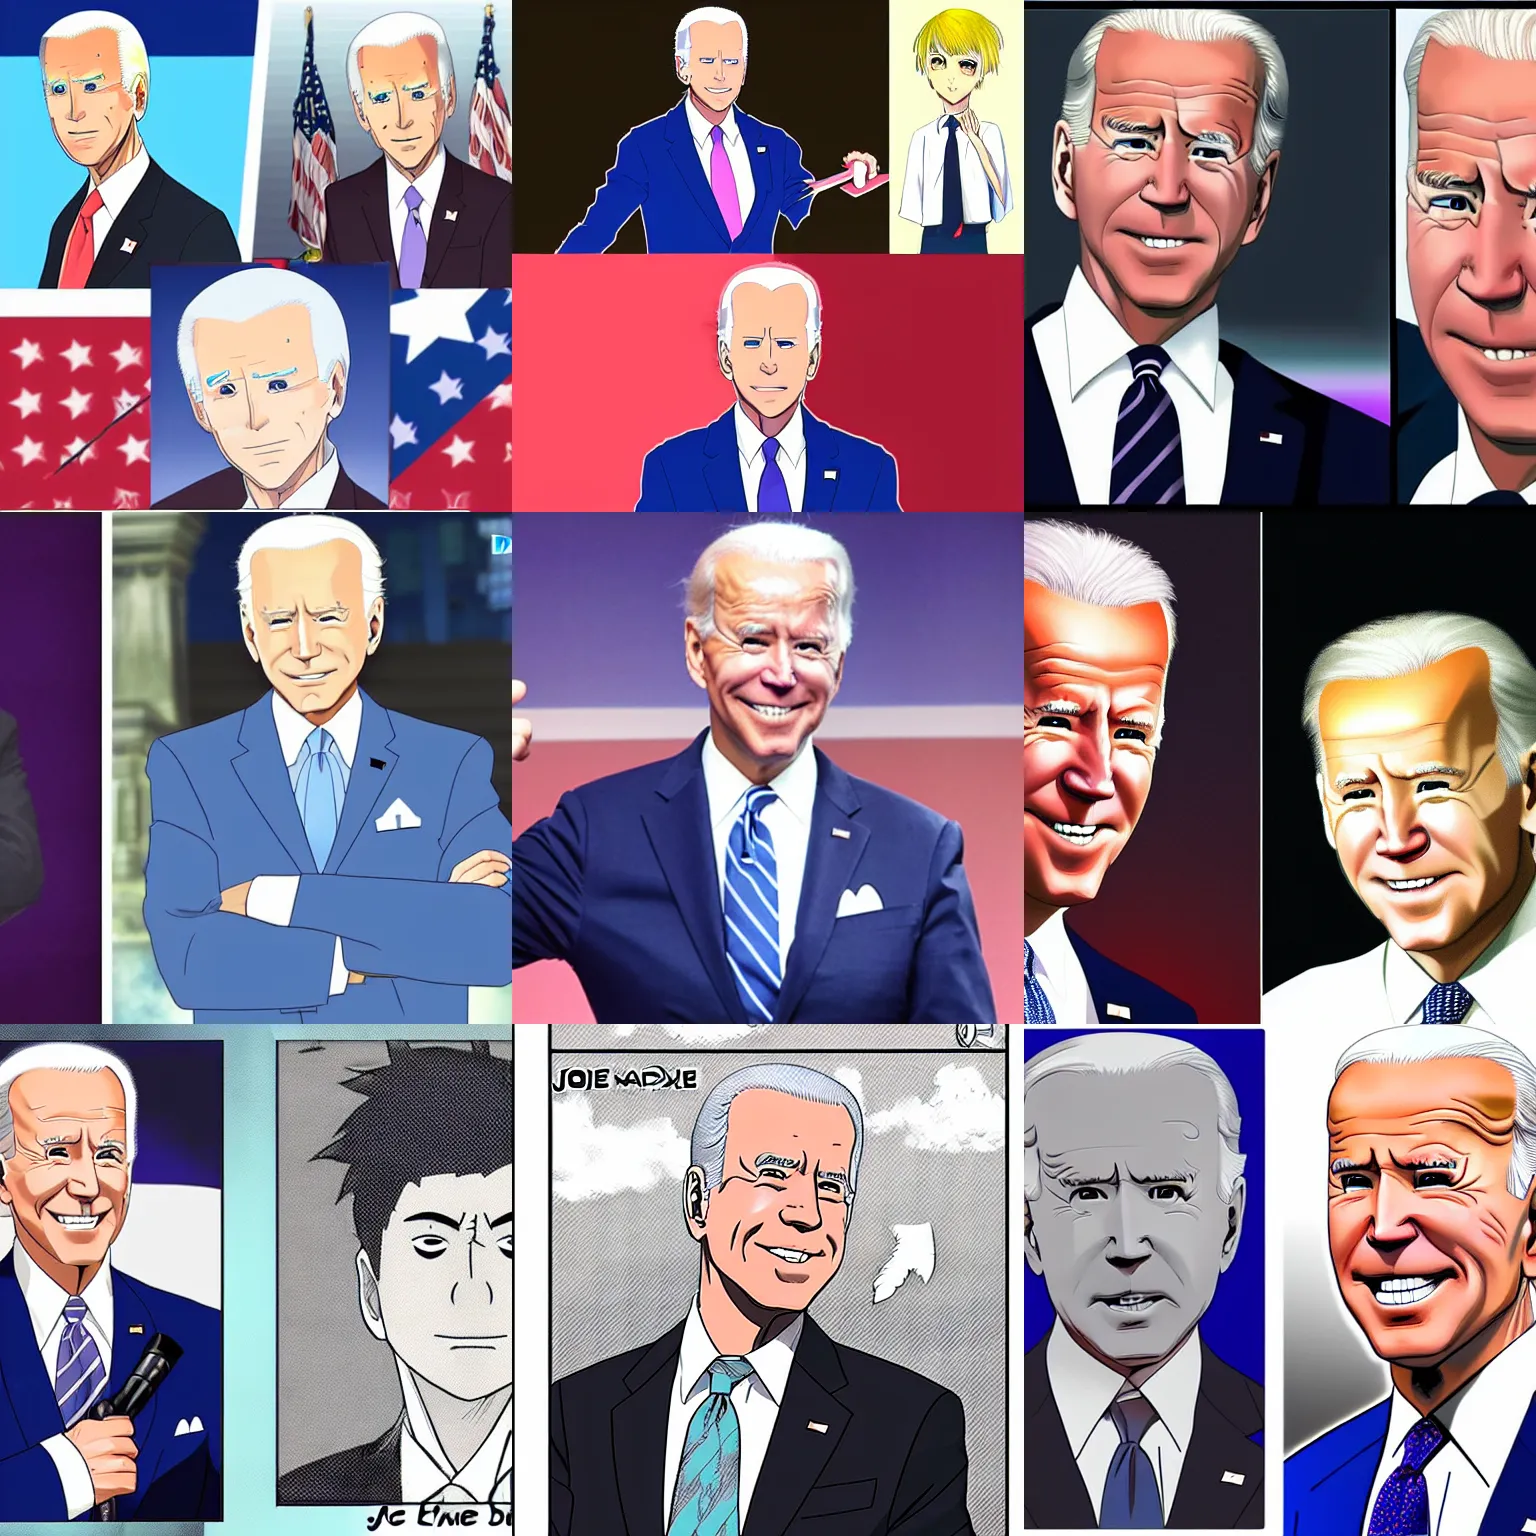 Prompt: Joe Biden as an anime or manga character, transforming into his final form, shoujo vibes